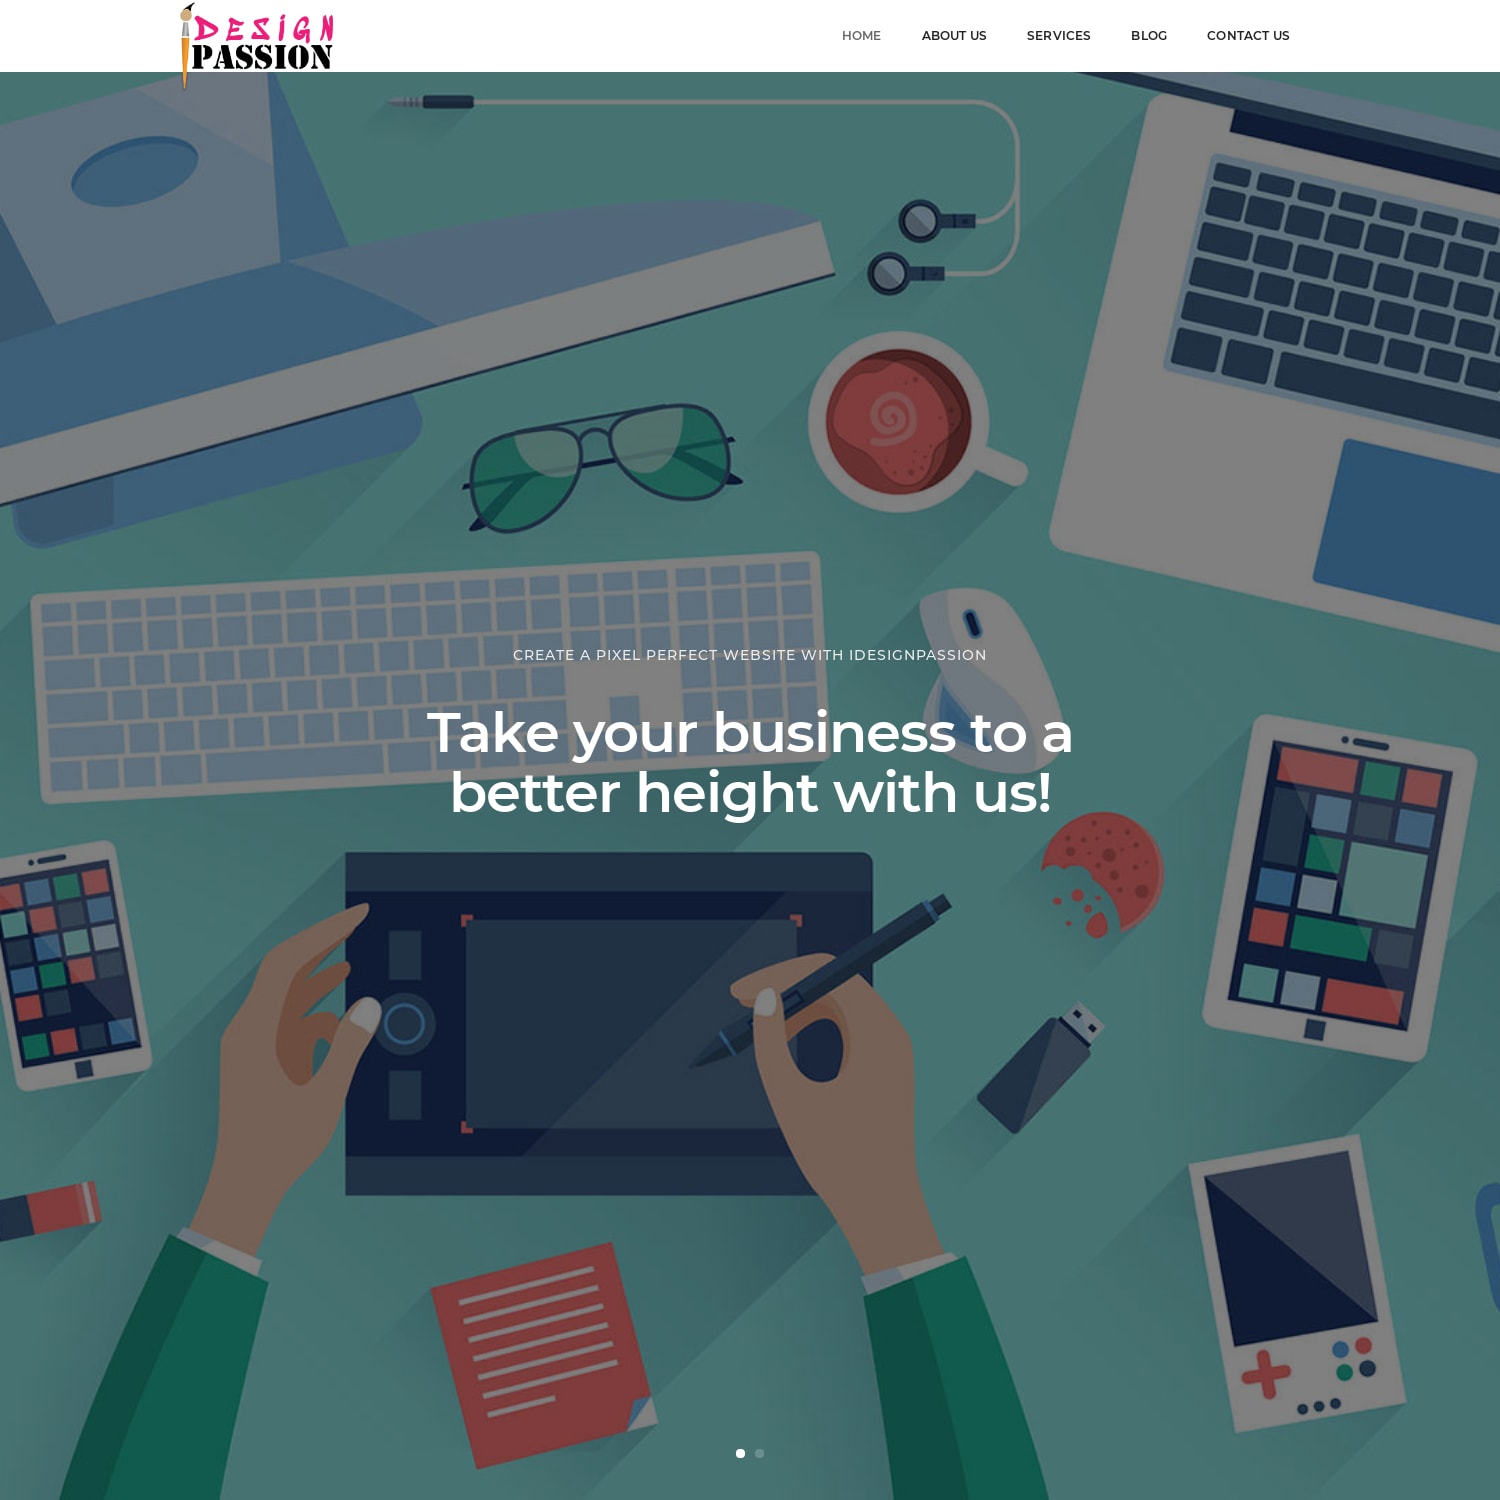 Create Attractive Looking Business Websites at idesignpassion